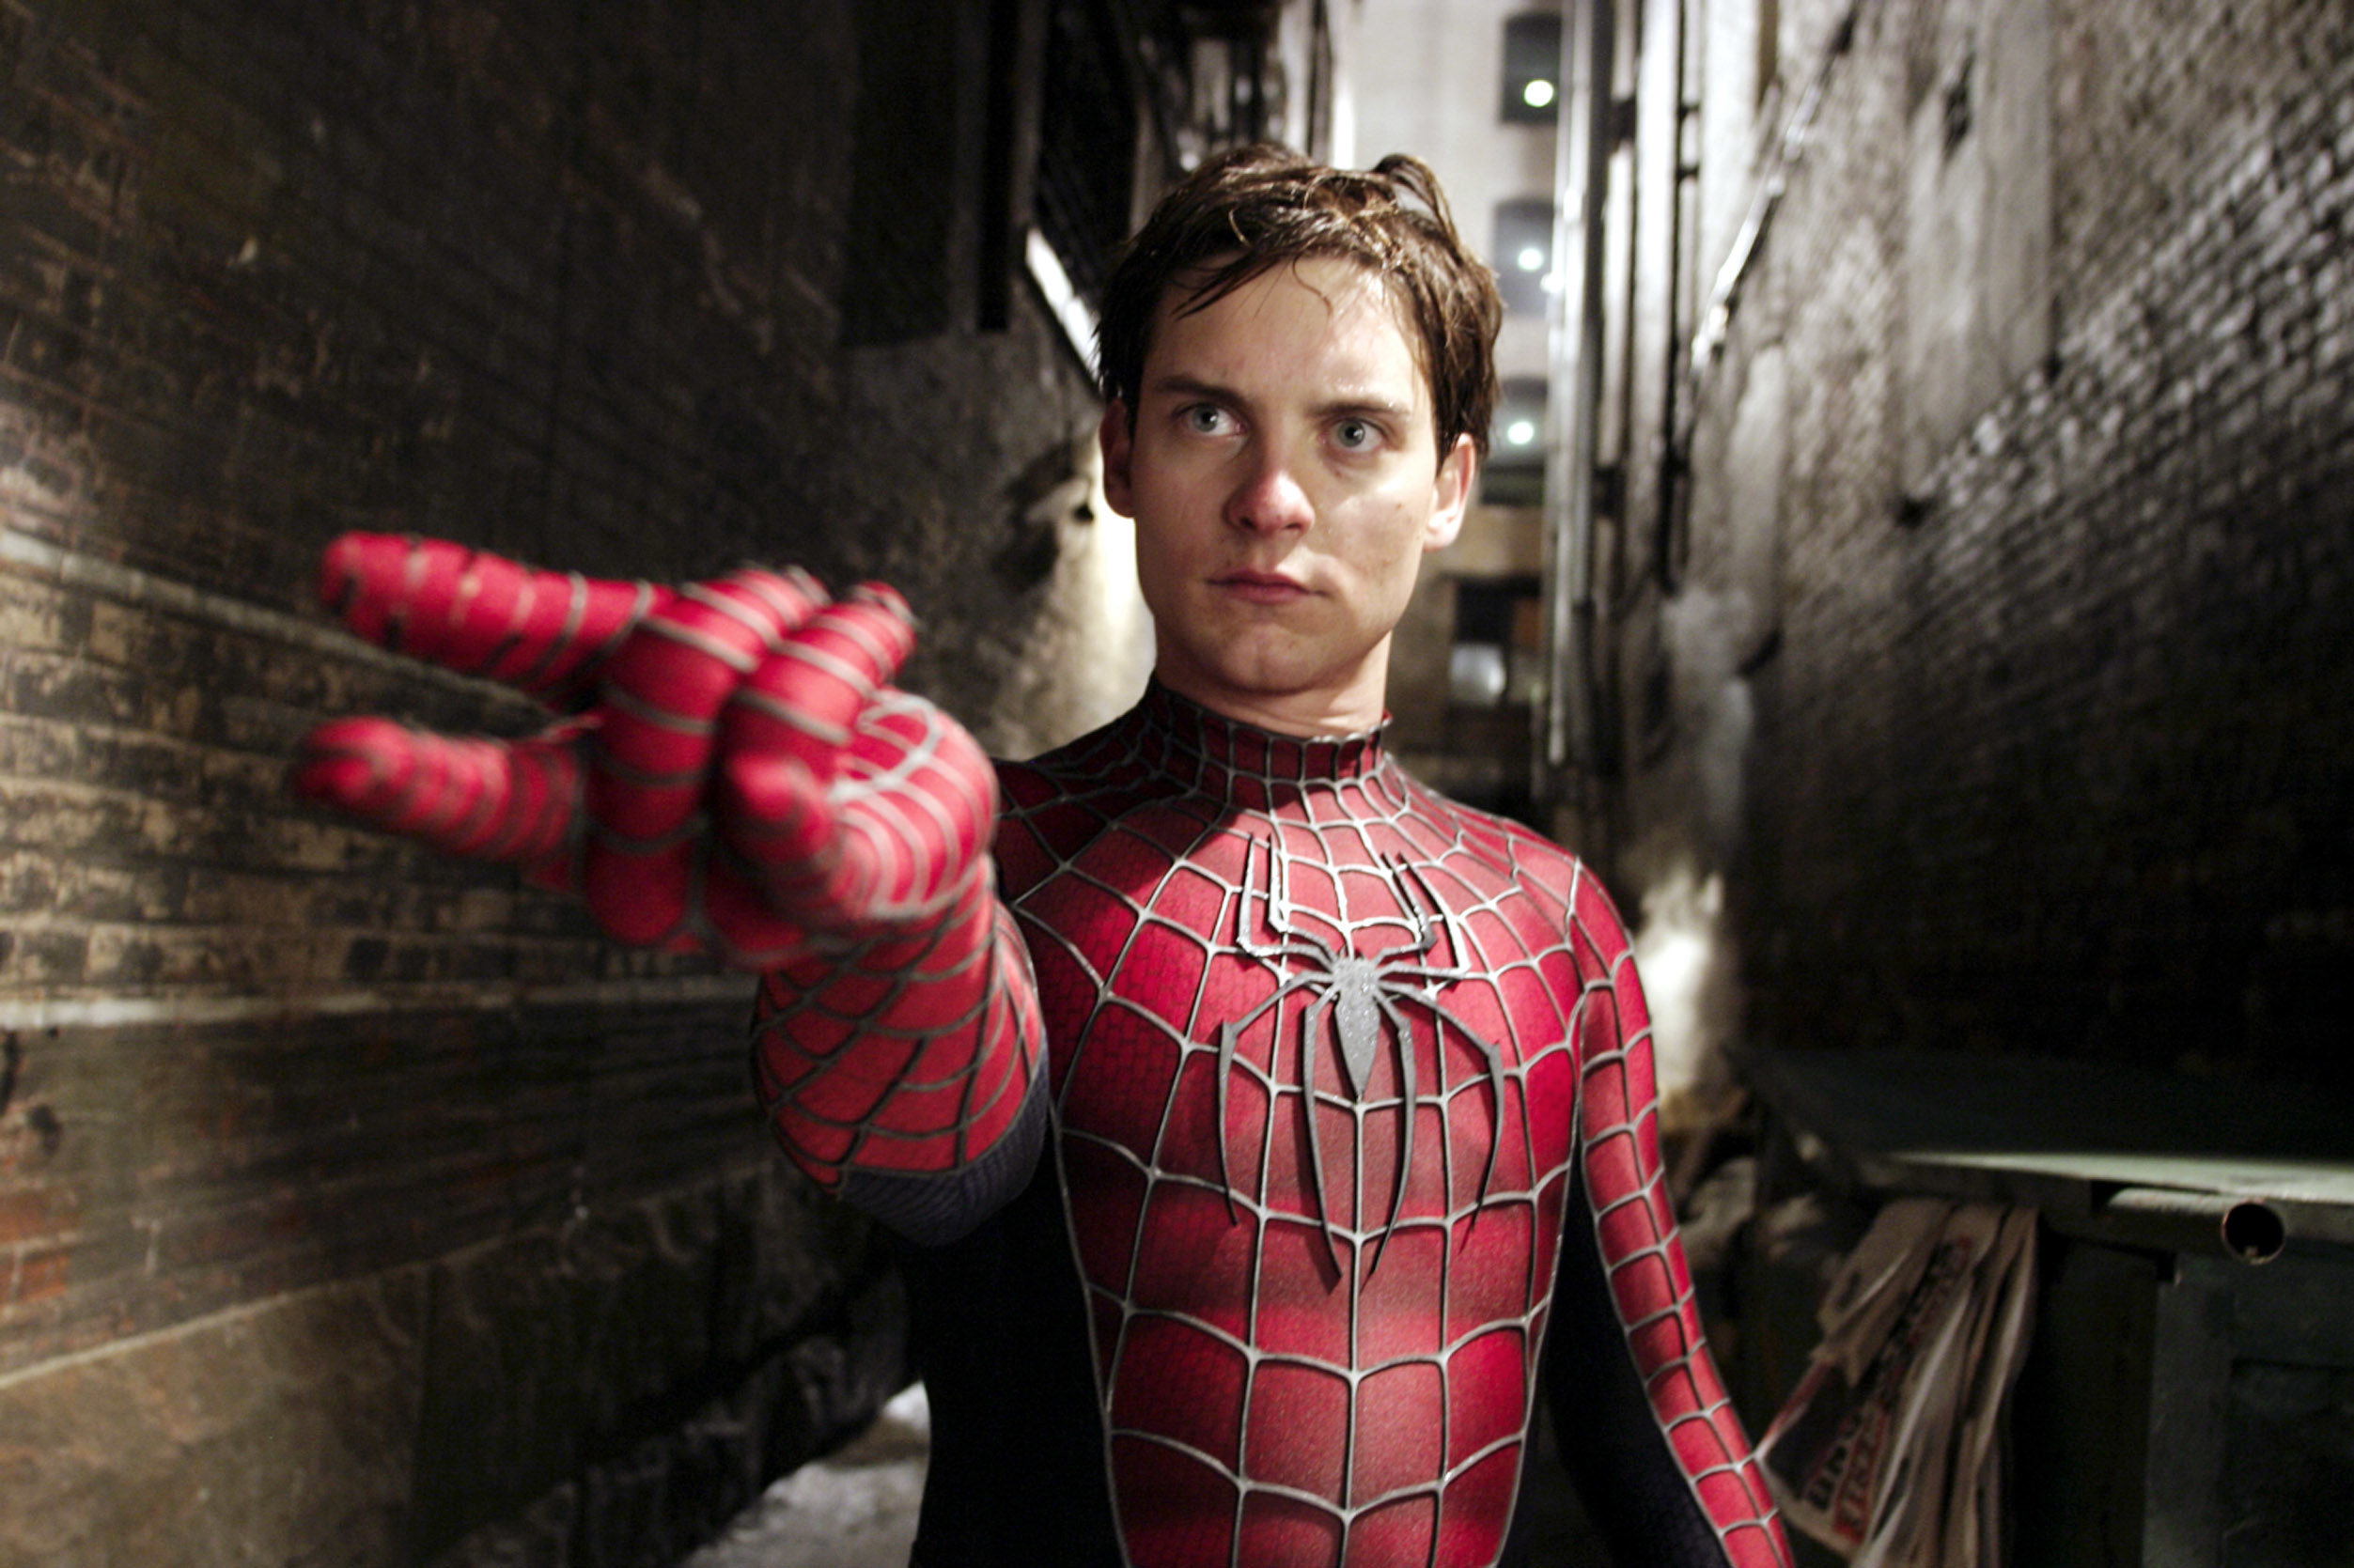 Toby Maguire as Spider-Man shooting a web